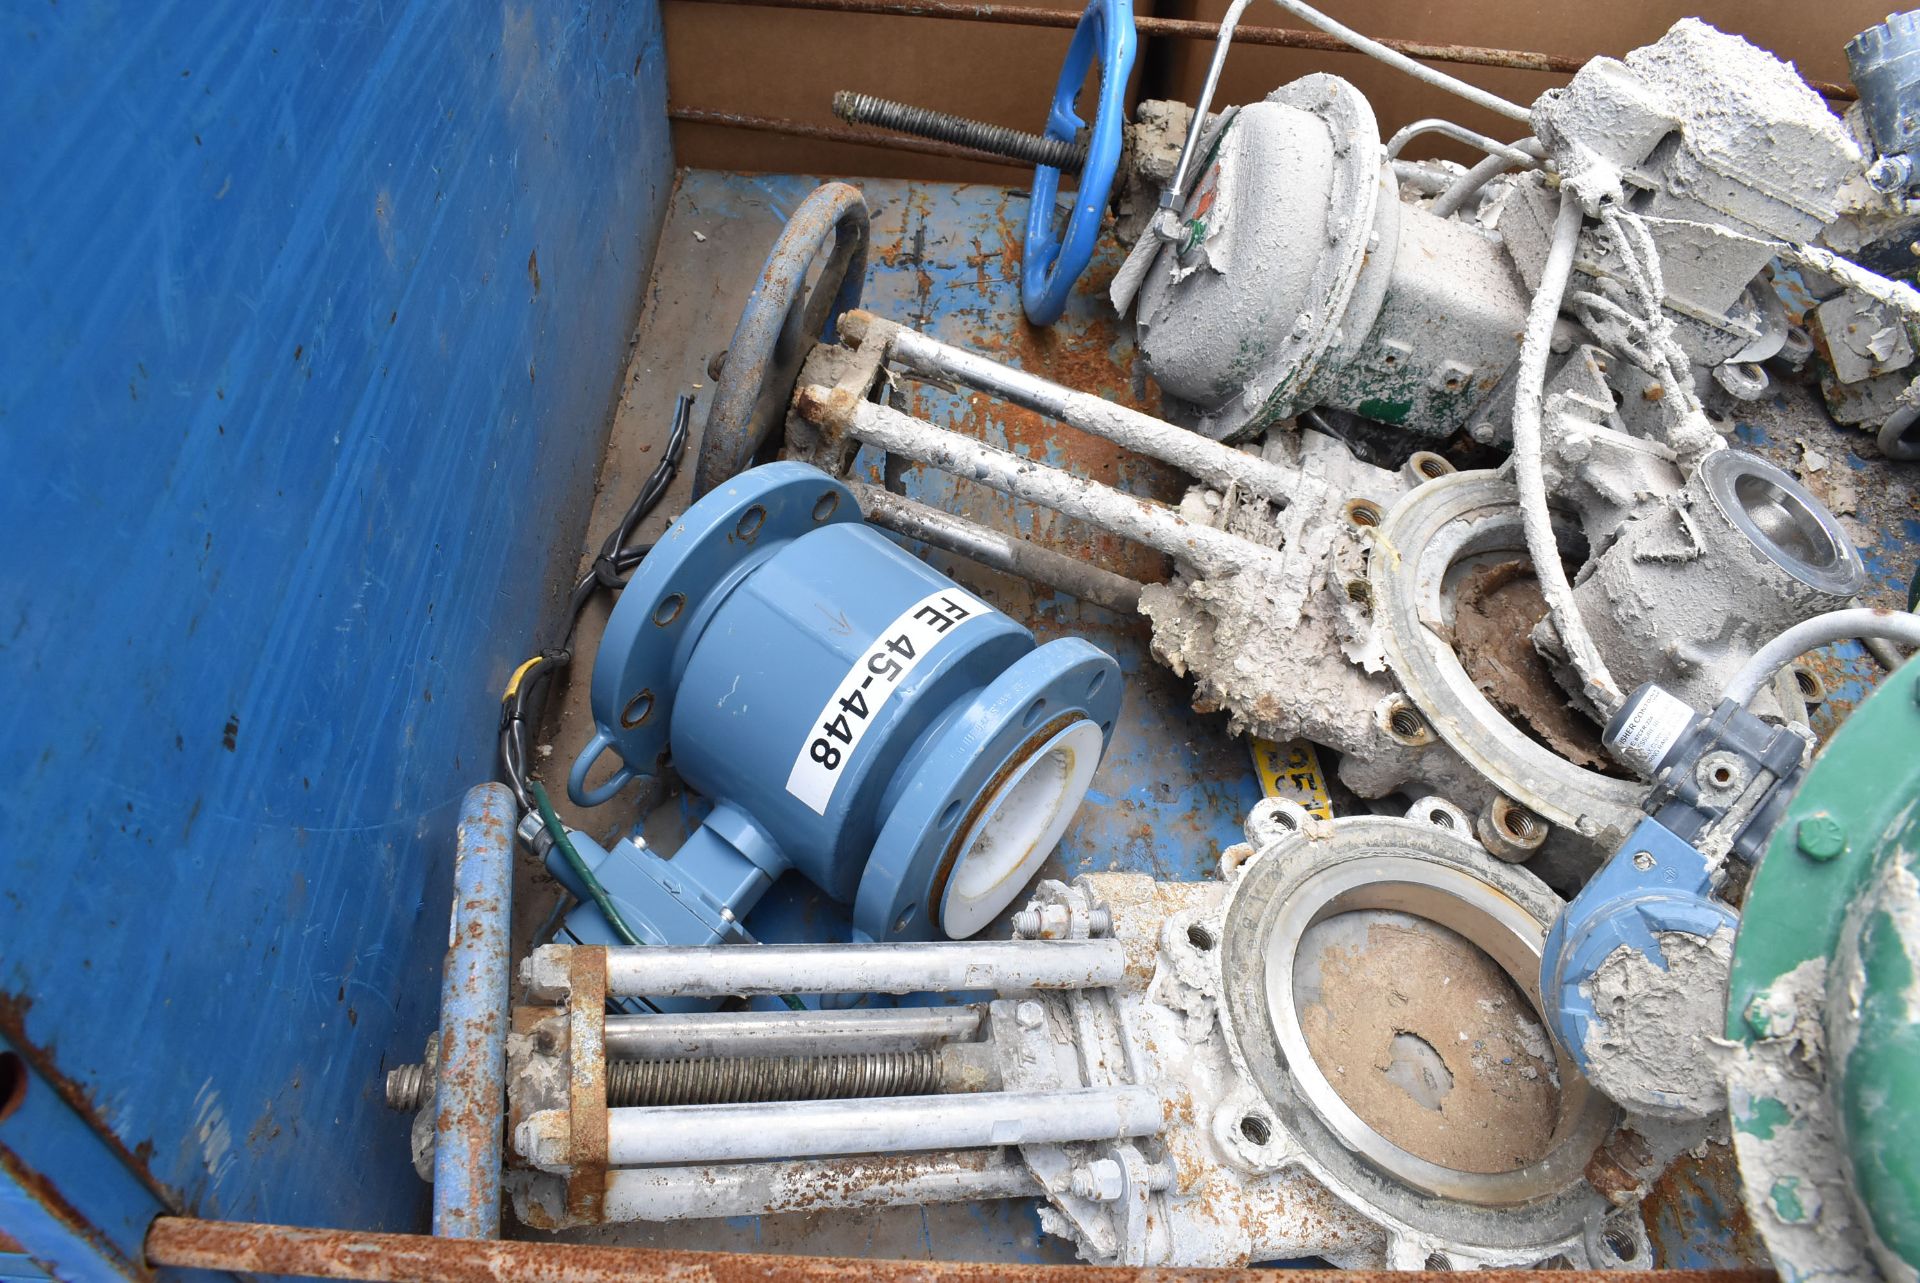 LOT/ CART WITH CONTENTS - FISHER VALVES WITH ACTUATORS, MAGNETIC FLOWMETERS, KNIFE VALVES [RIGGING - Image 2 of 5